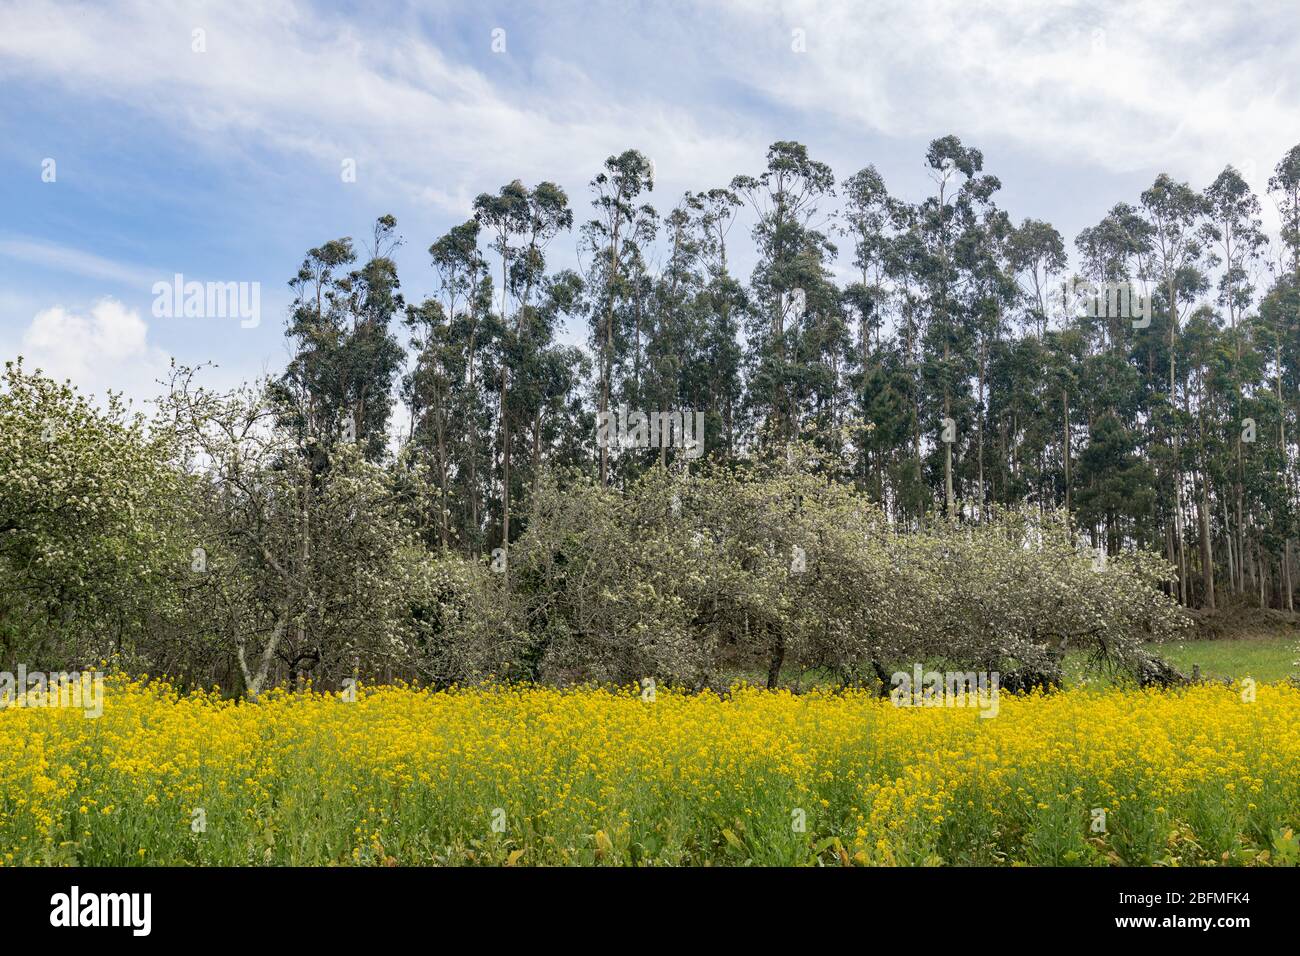 White flower tree in the middle of a field full of yellow flowers in spring Stock Photo